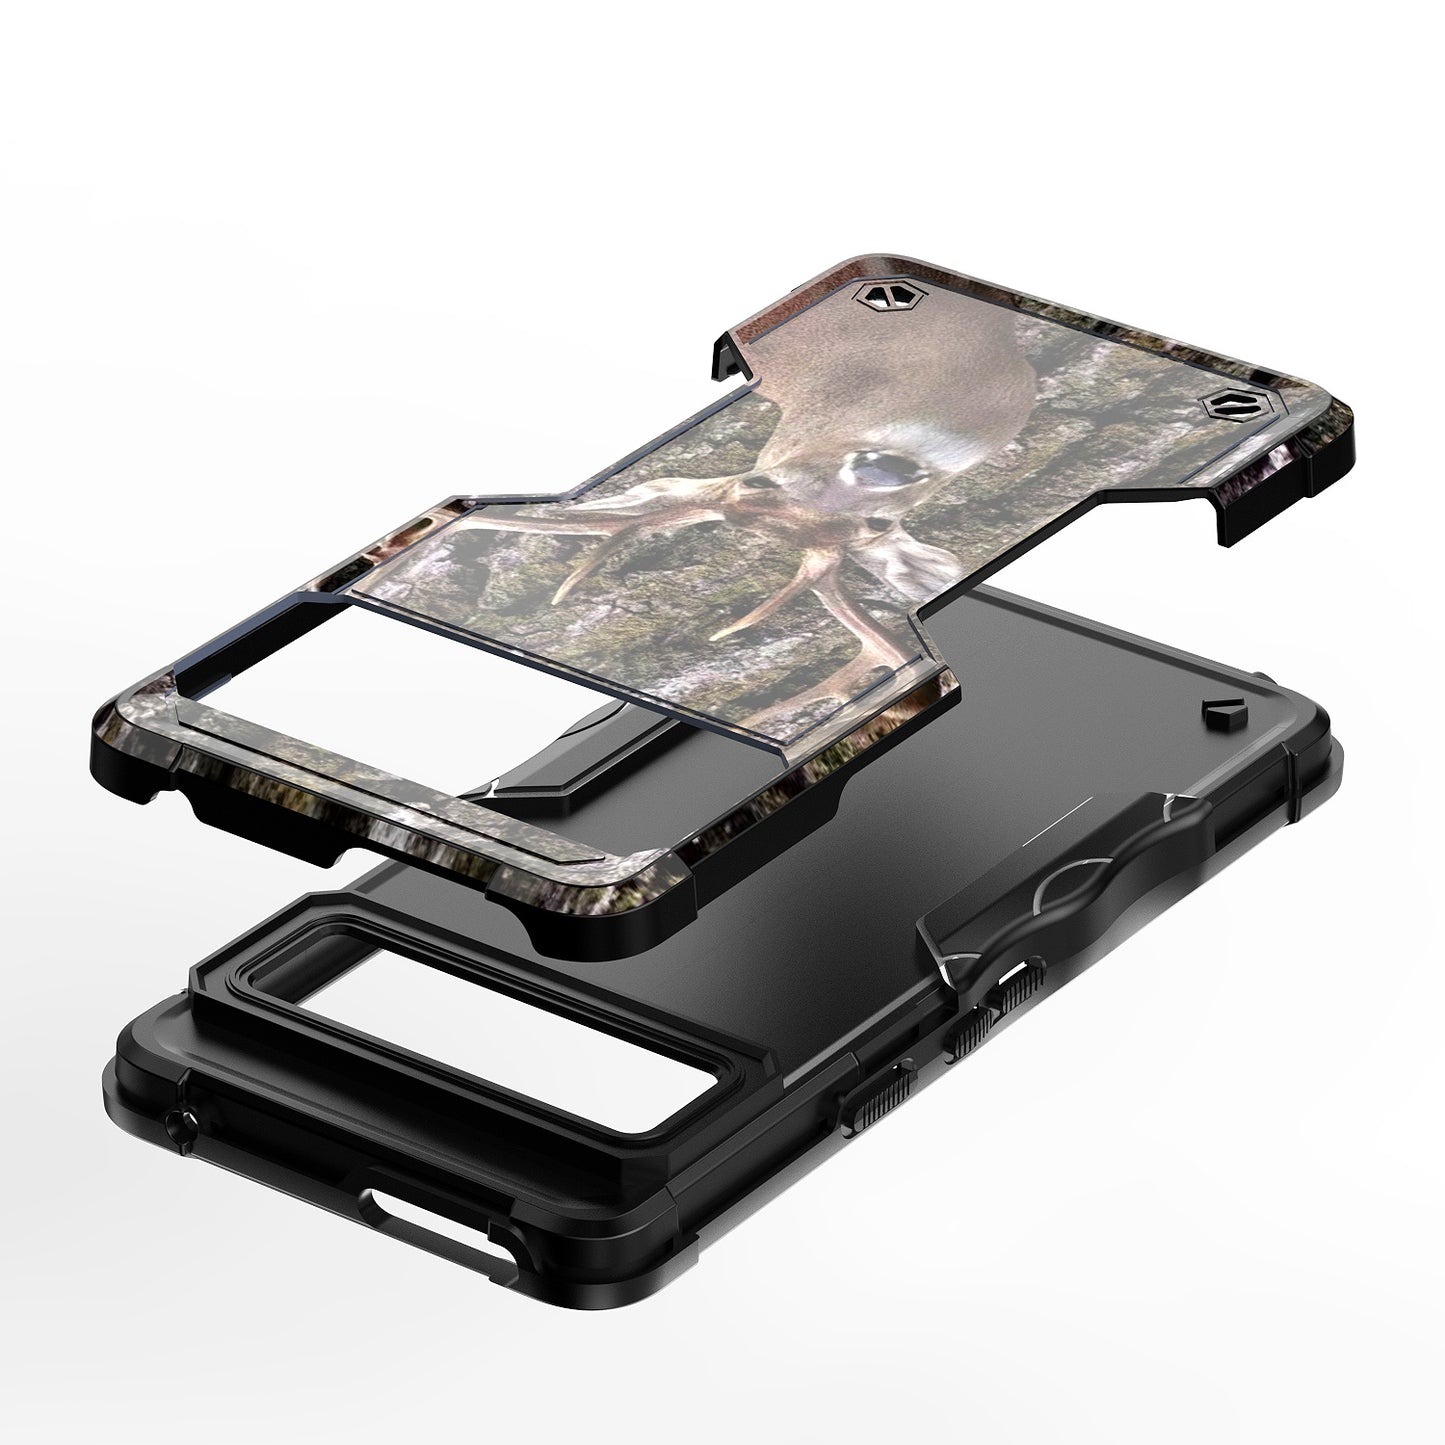 Case For Google Pixel 7 - Hybrid Grip Design Shockproof Phone Cover - Whitetail Buck